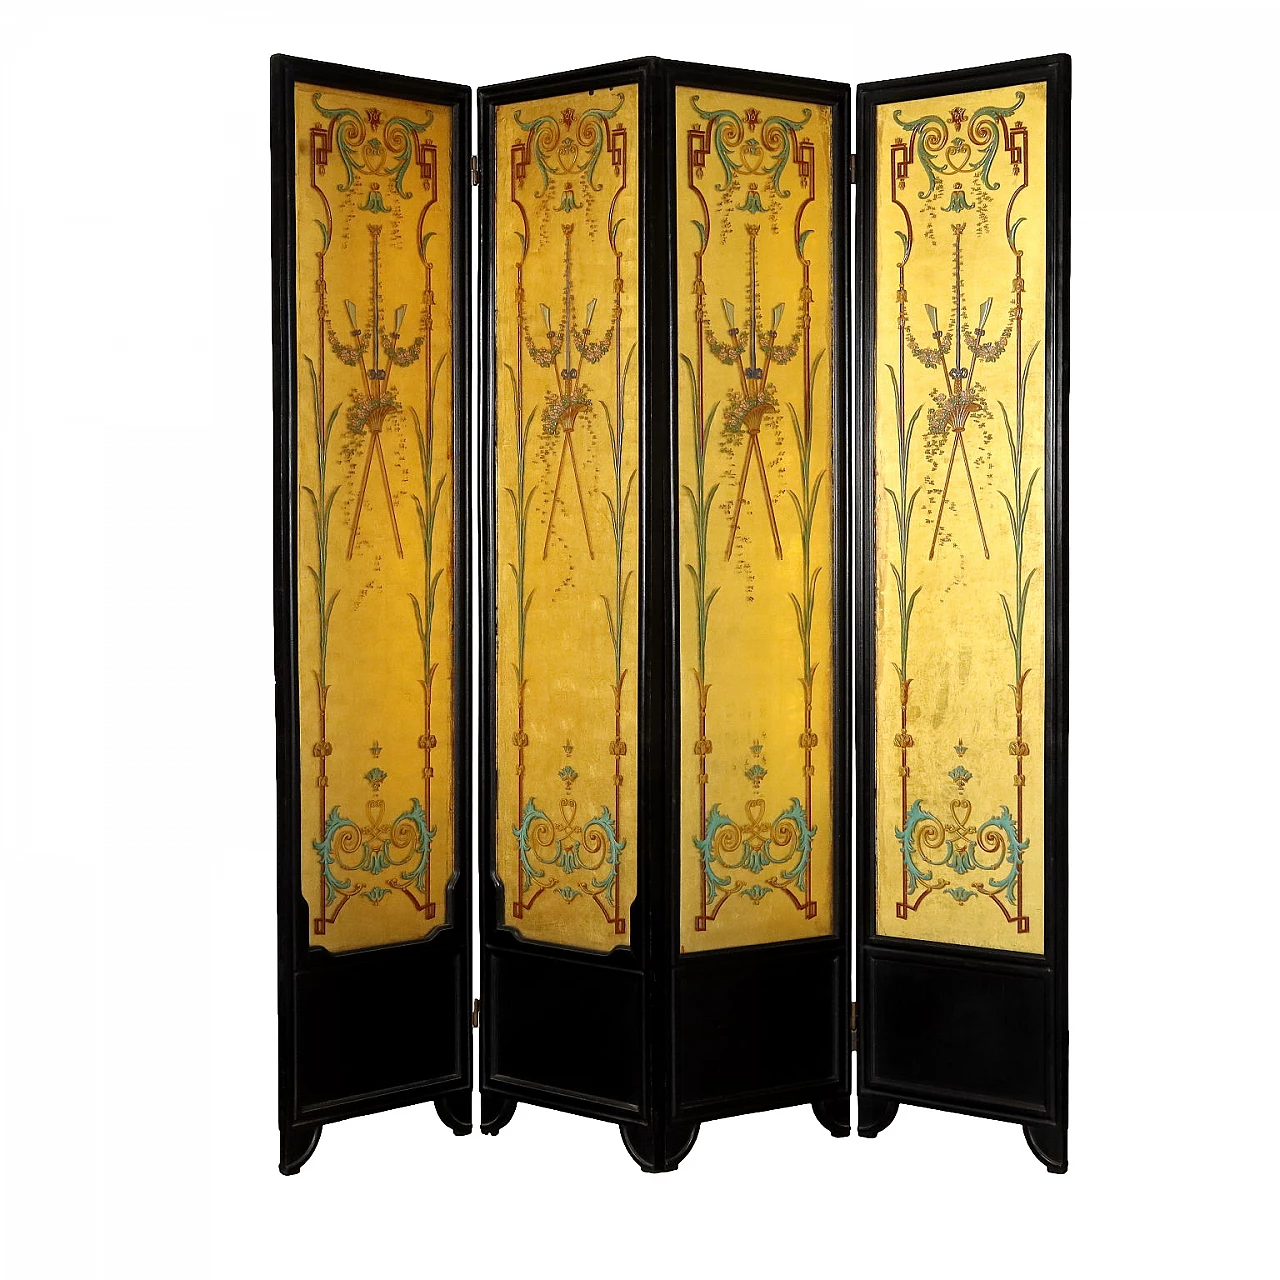 Folding screen in ebonized wood and glass with gold leaf 1